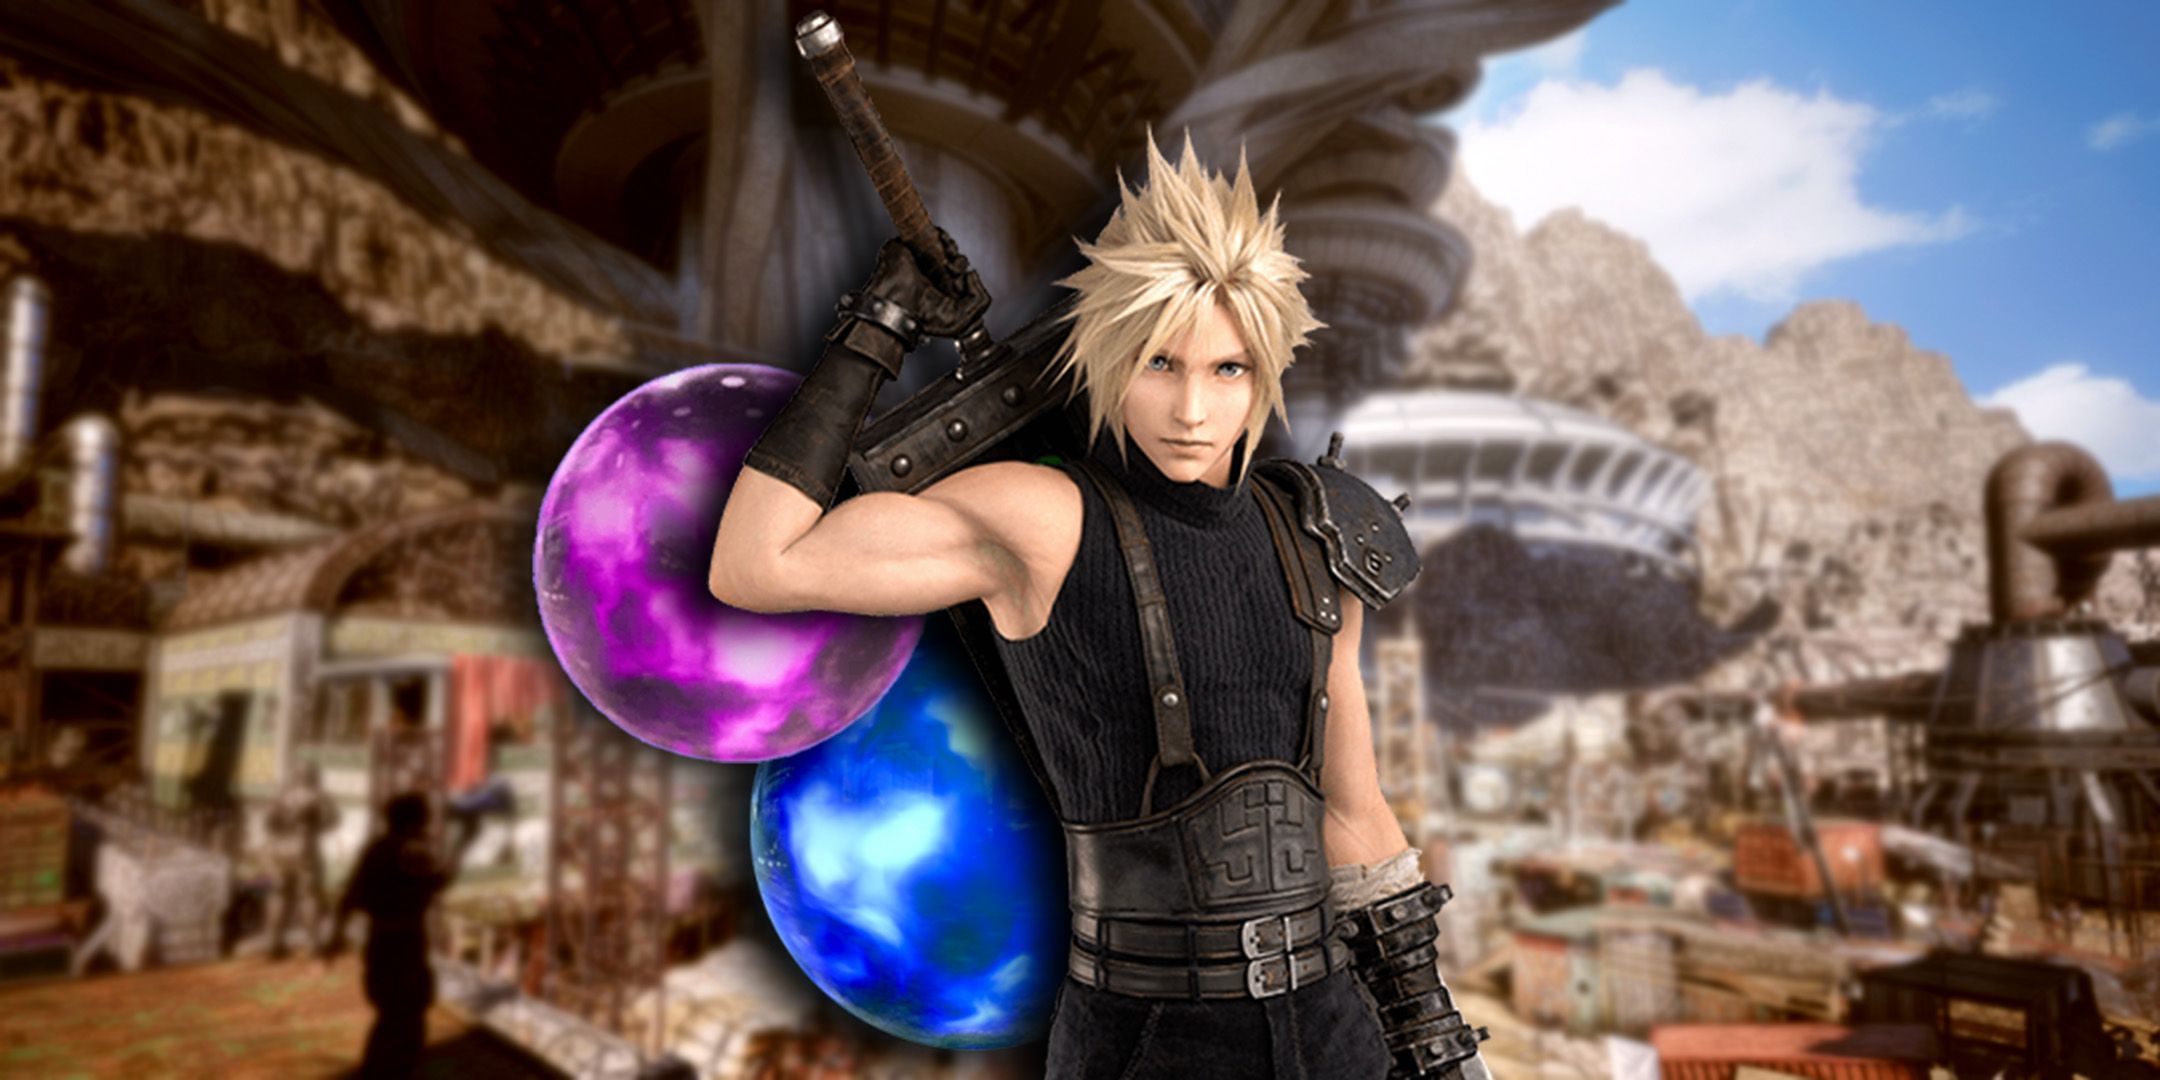 Cloud Strife standing next to two orbs of materia